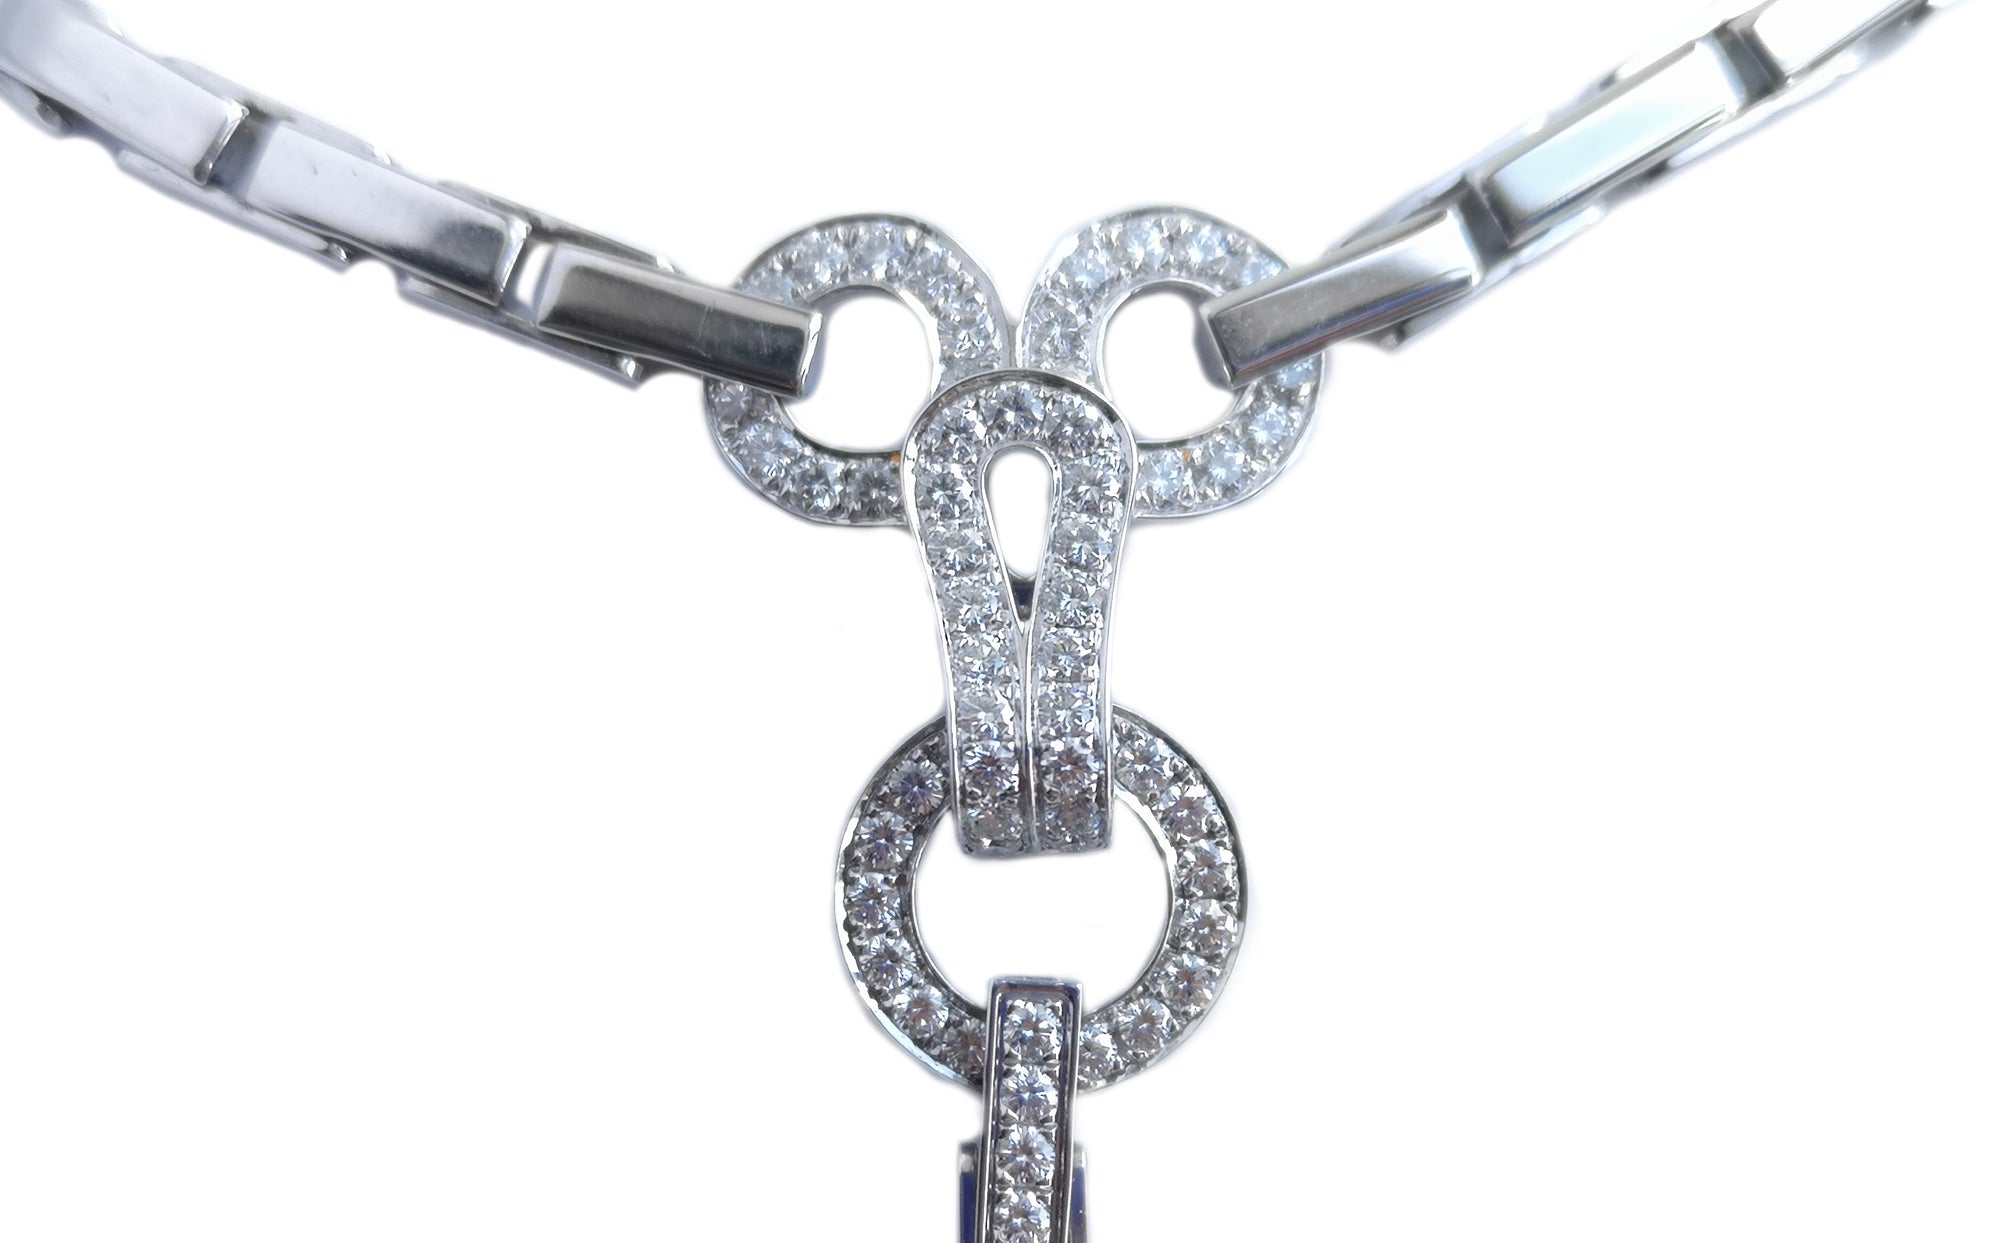 Cartier Diamond & Pearl Agrafe Necklace in 18k White Gold